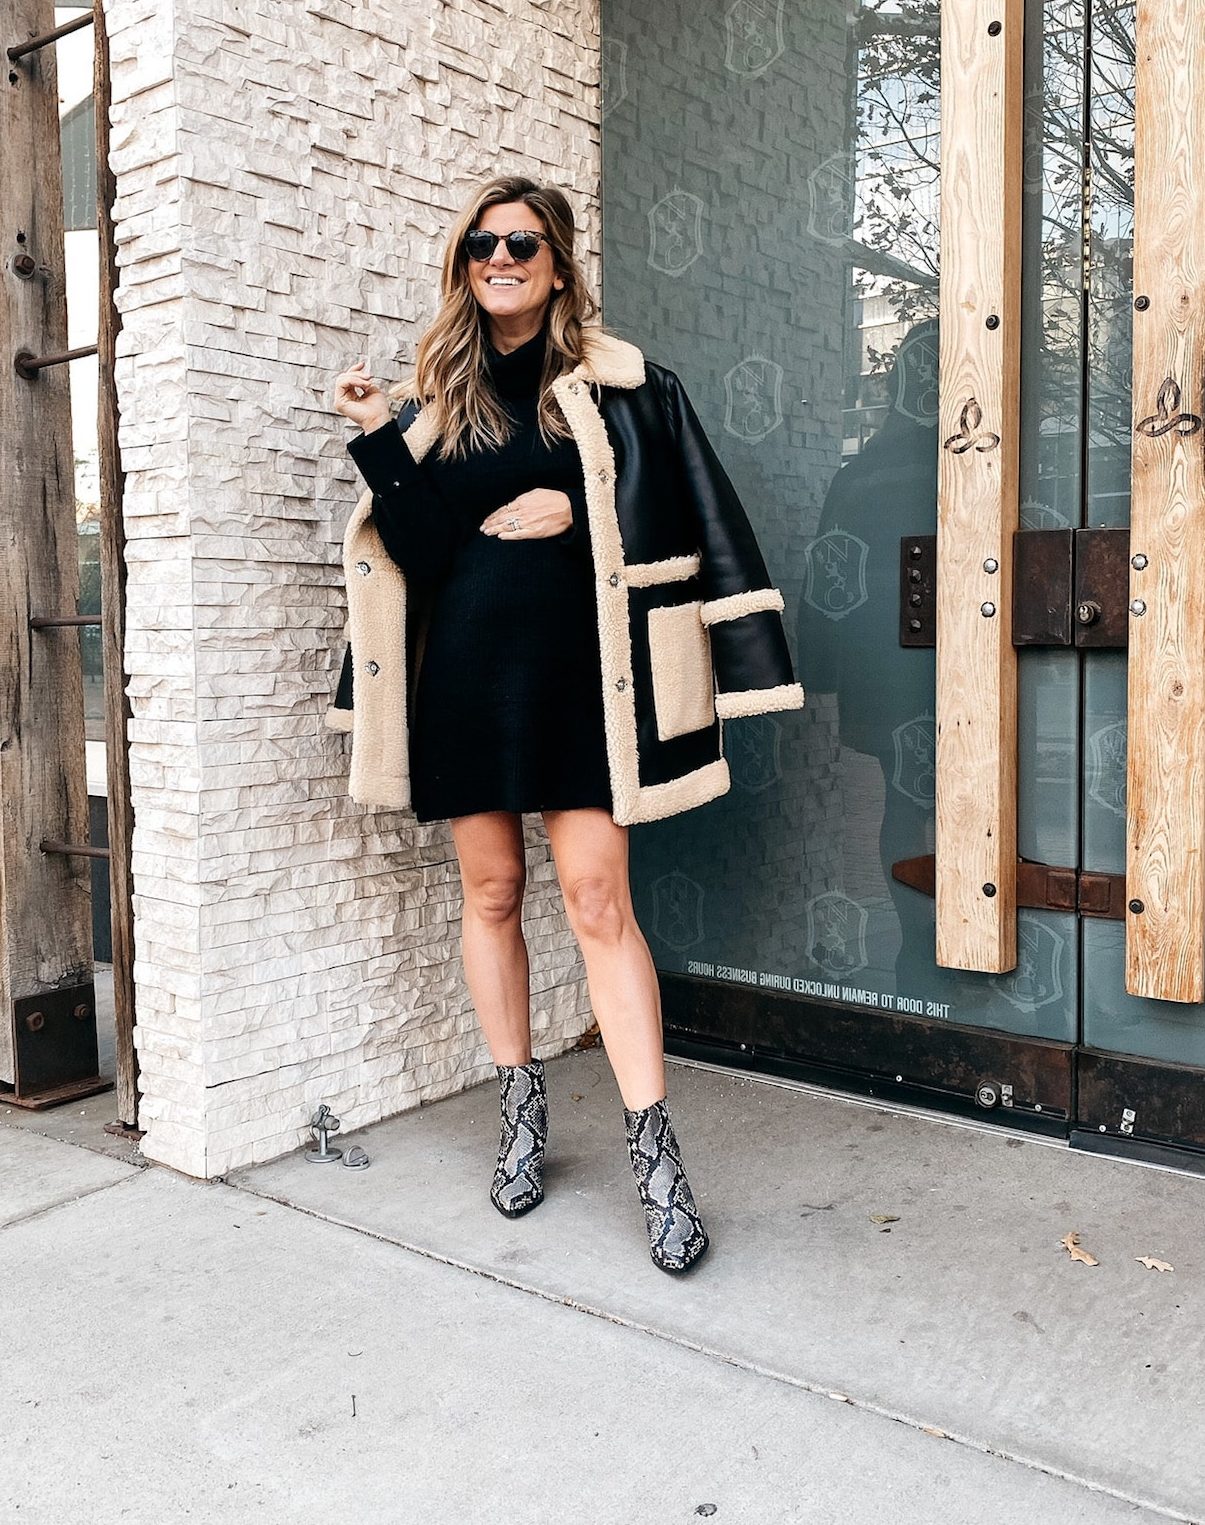 Brighton Butler wearing black leather and fur coat with topshop black dress and snakeskin booties